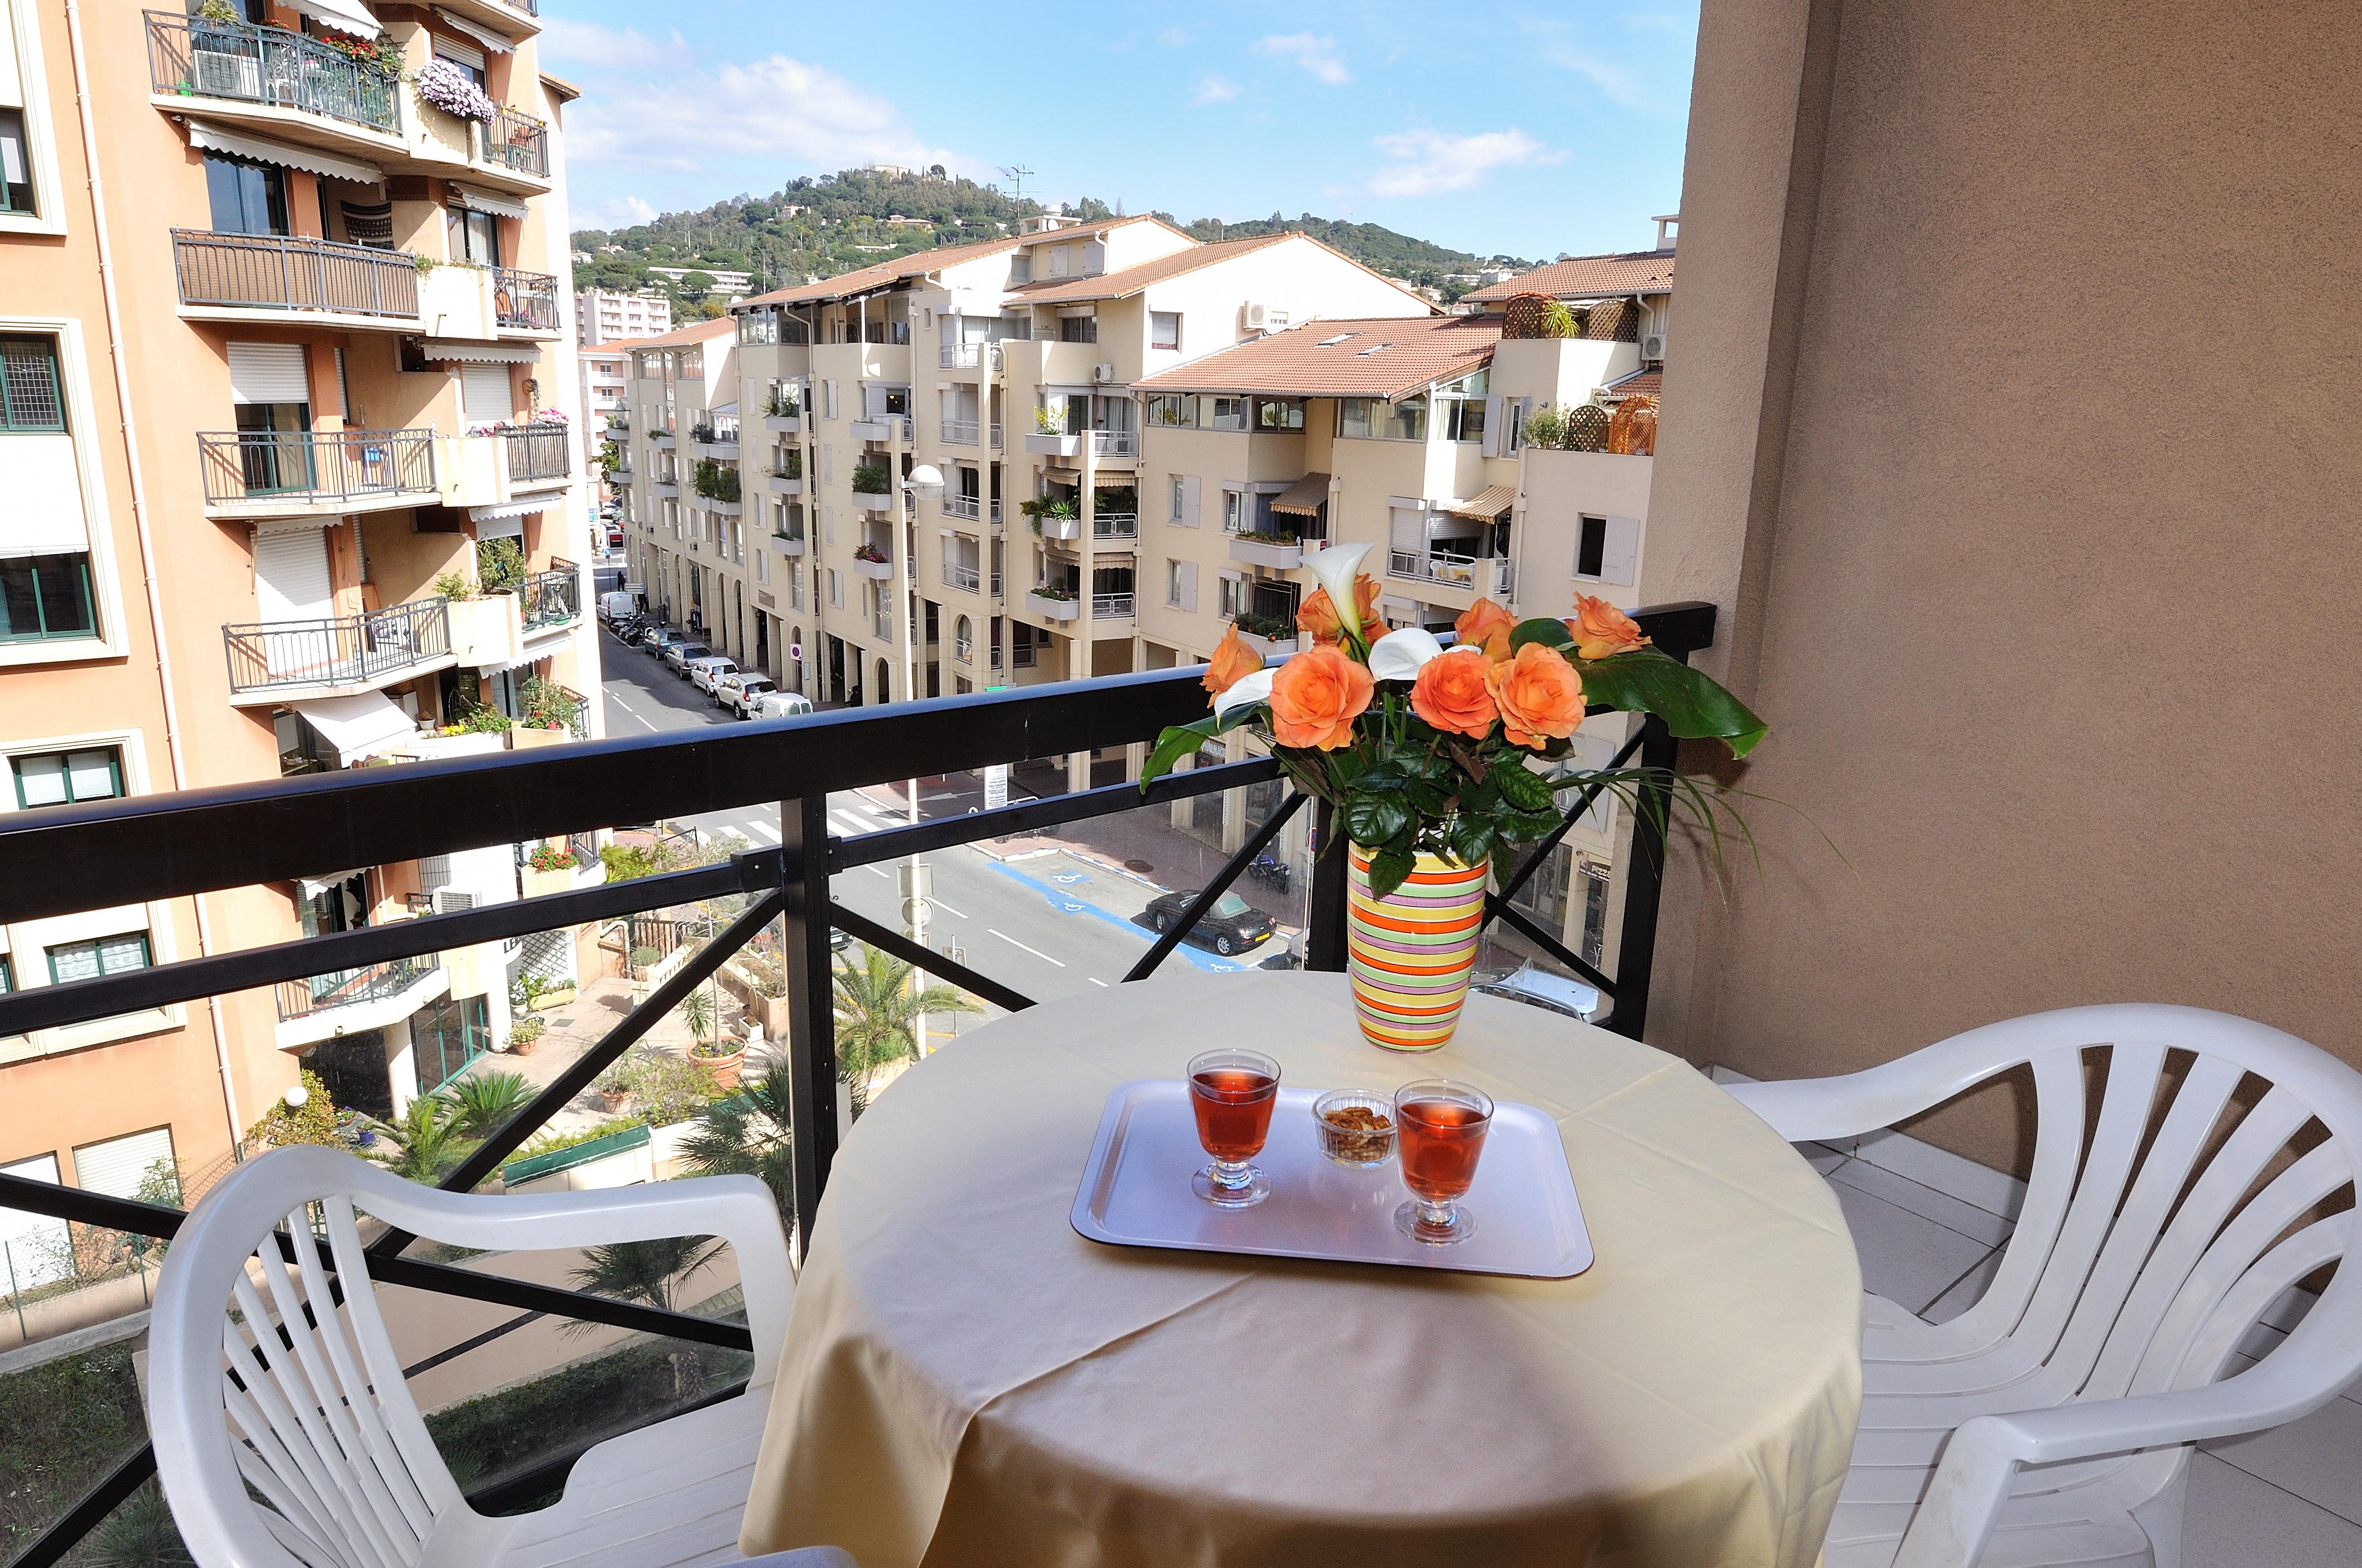 HOTEL RESIDHOTEL VILLA MAUPASSANT CANNES 2* (France) - from £ 53 | HOTELMIX